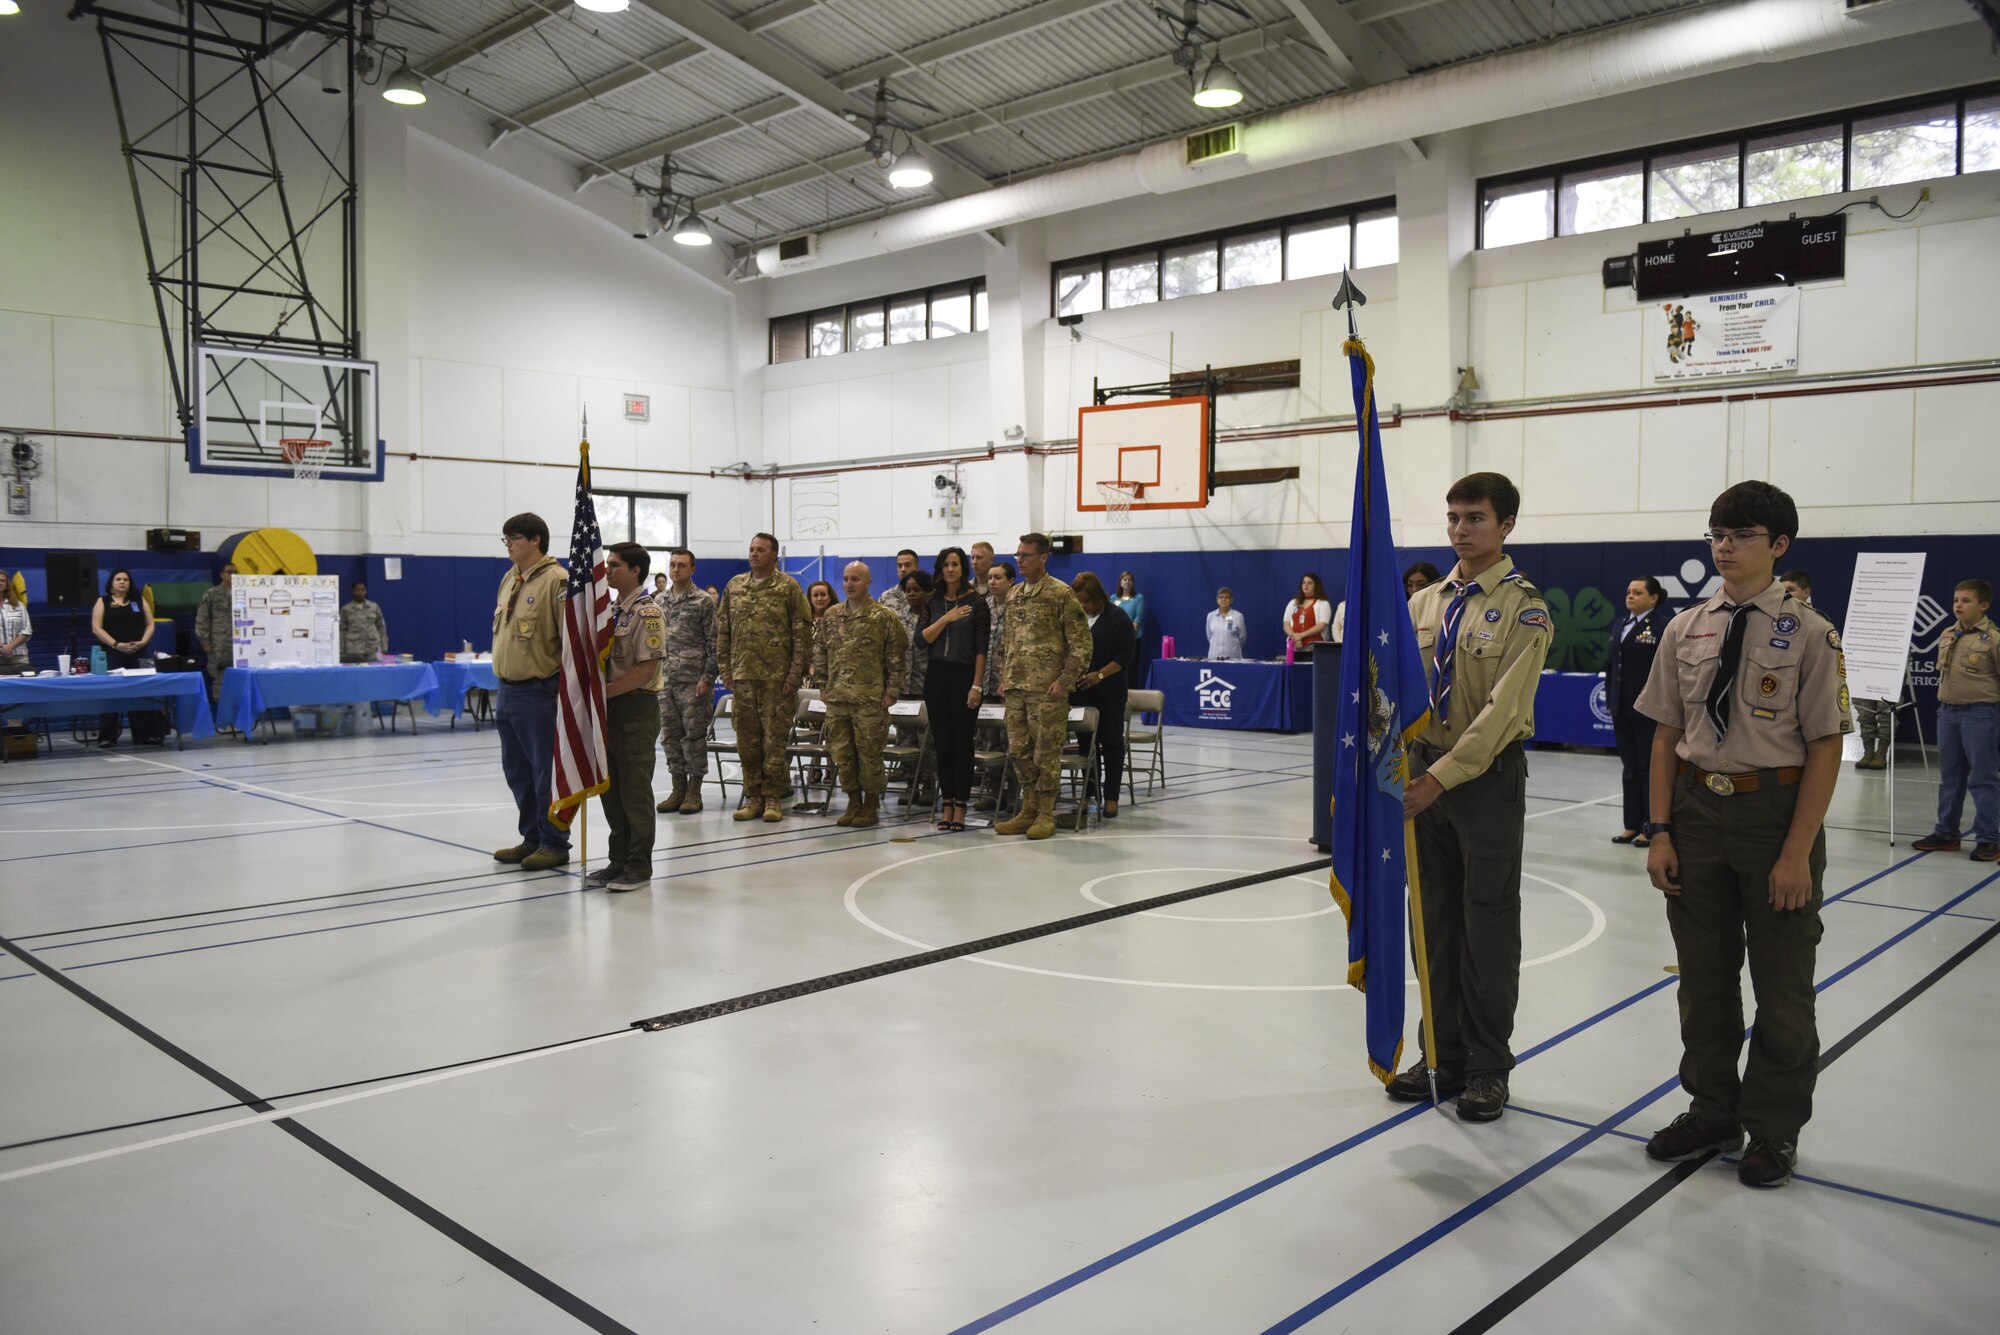 Boy Scouts of America Troop 509 present the colors during the Month of the Military Child and Child Abuse Prevention Month proclamation signing ceremony at the Youth Center, Hurlburt Field, Fla., April 3, 2017. April is designated as the MOMC, underscoring the important role military children play in the armed forces community. (U.S. Air Force photo by Senior Airman Jeff Parkinson)